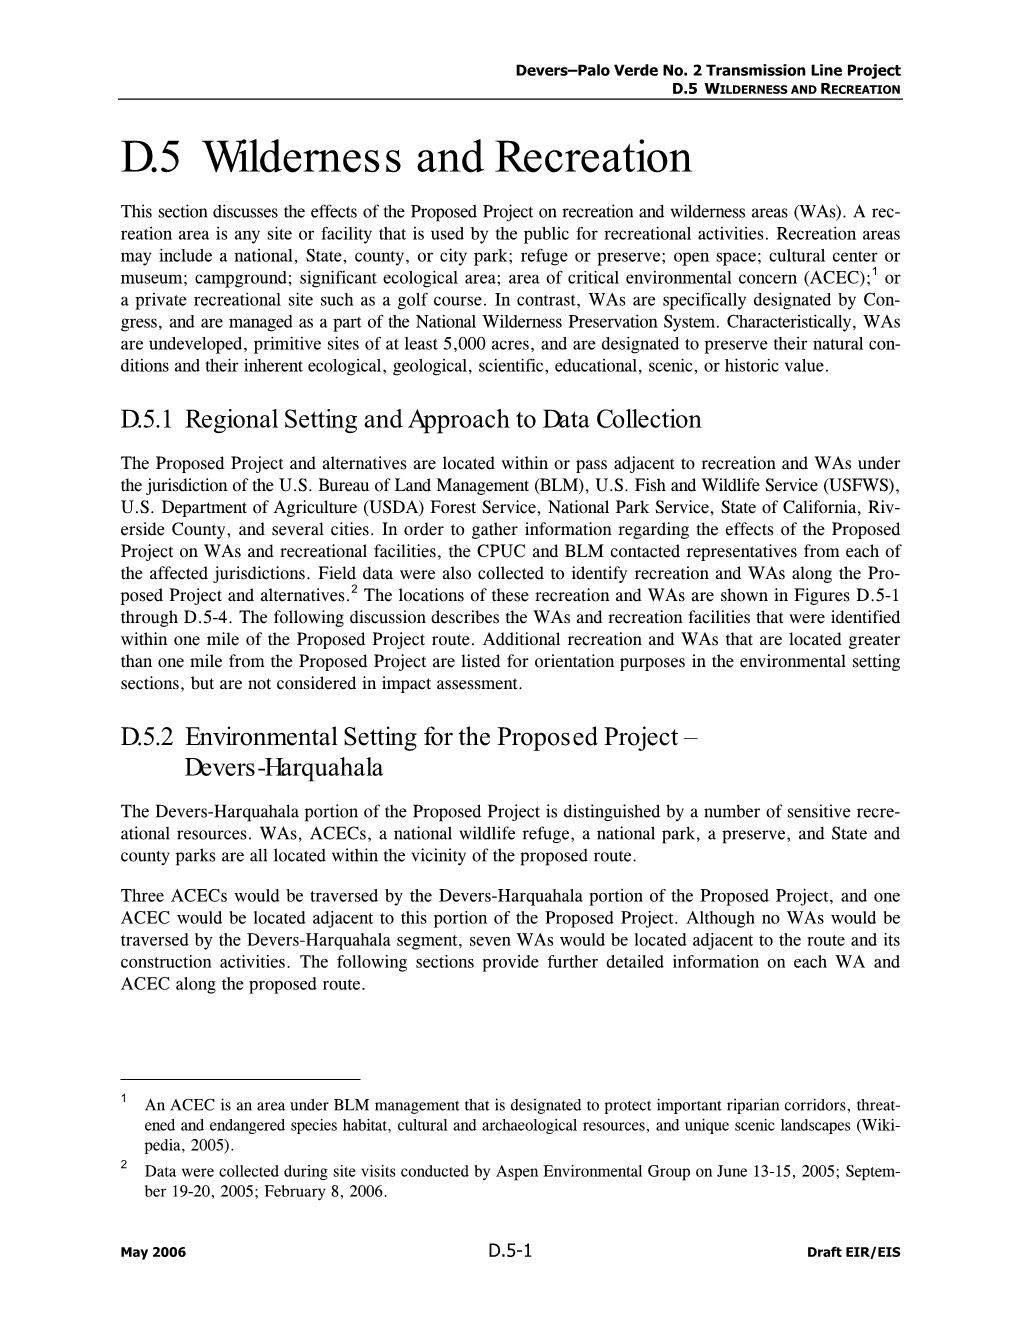 D.5 Wilderness and Recreation